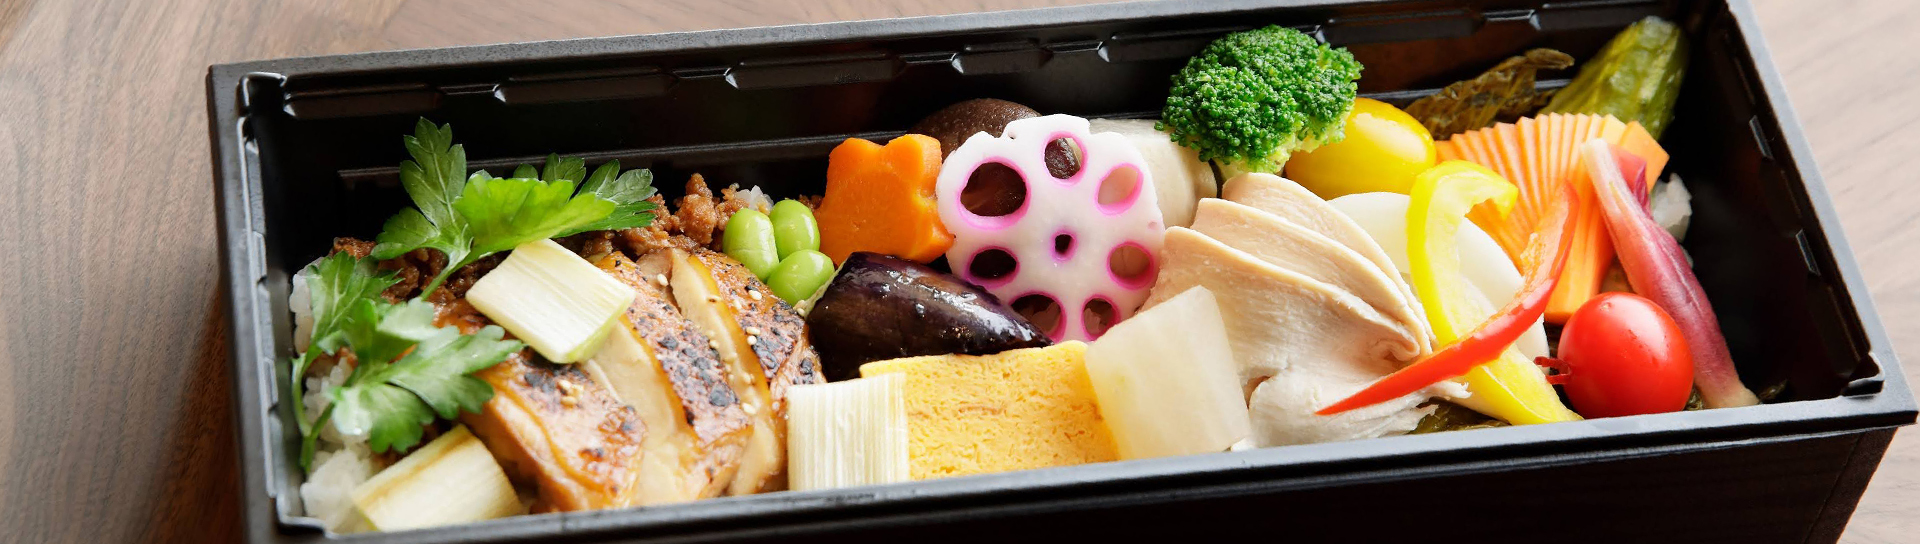 bento box of various different food